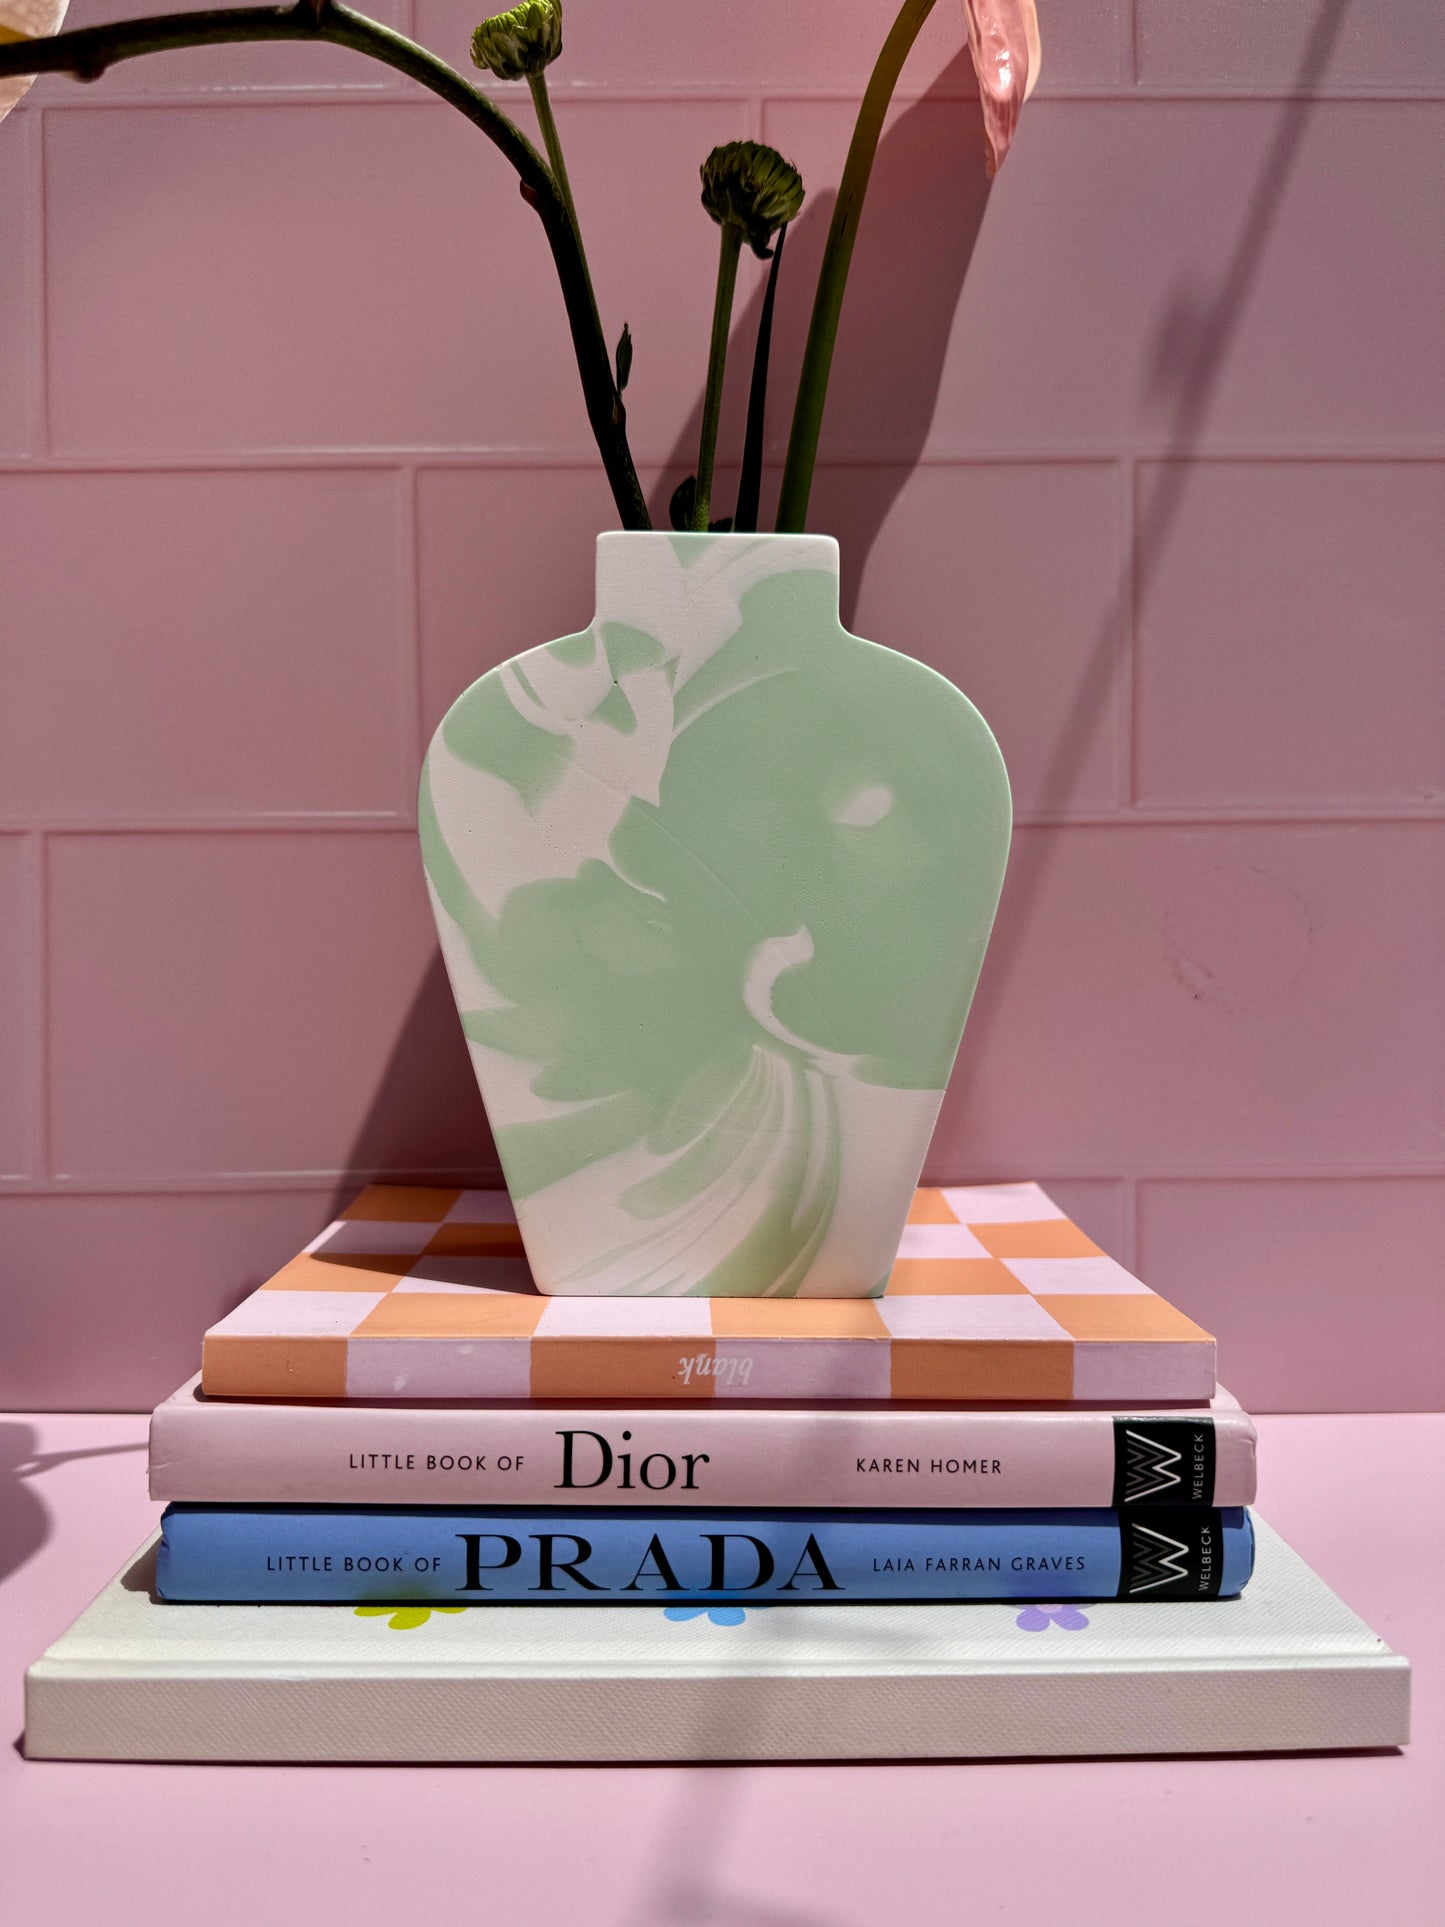 Smart Vase - Homewares that play their favourite song!